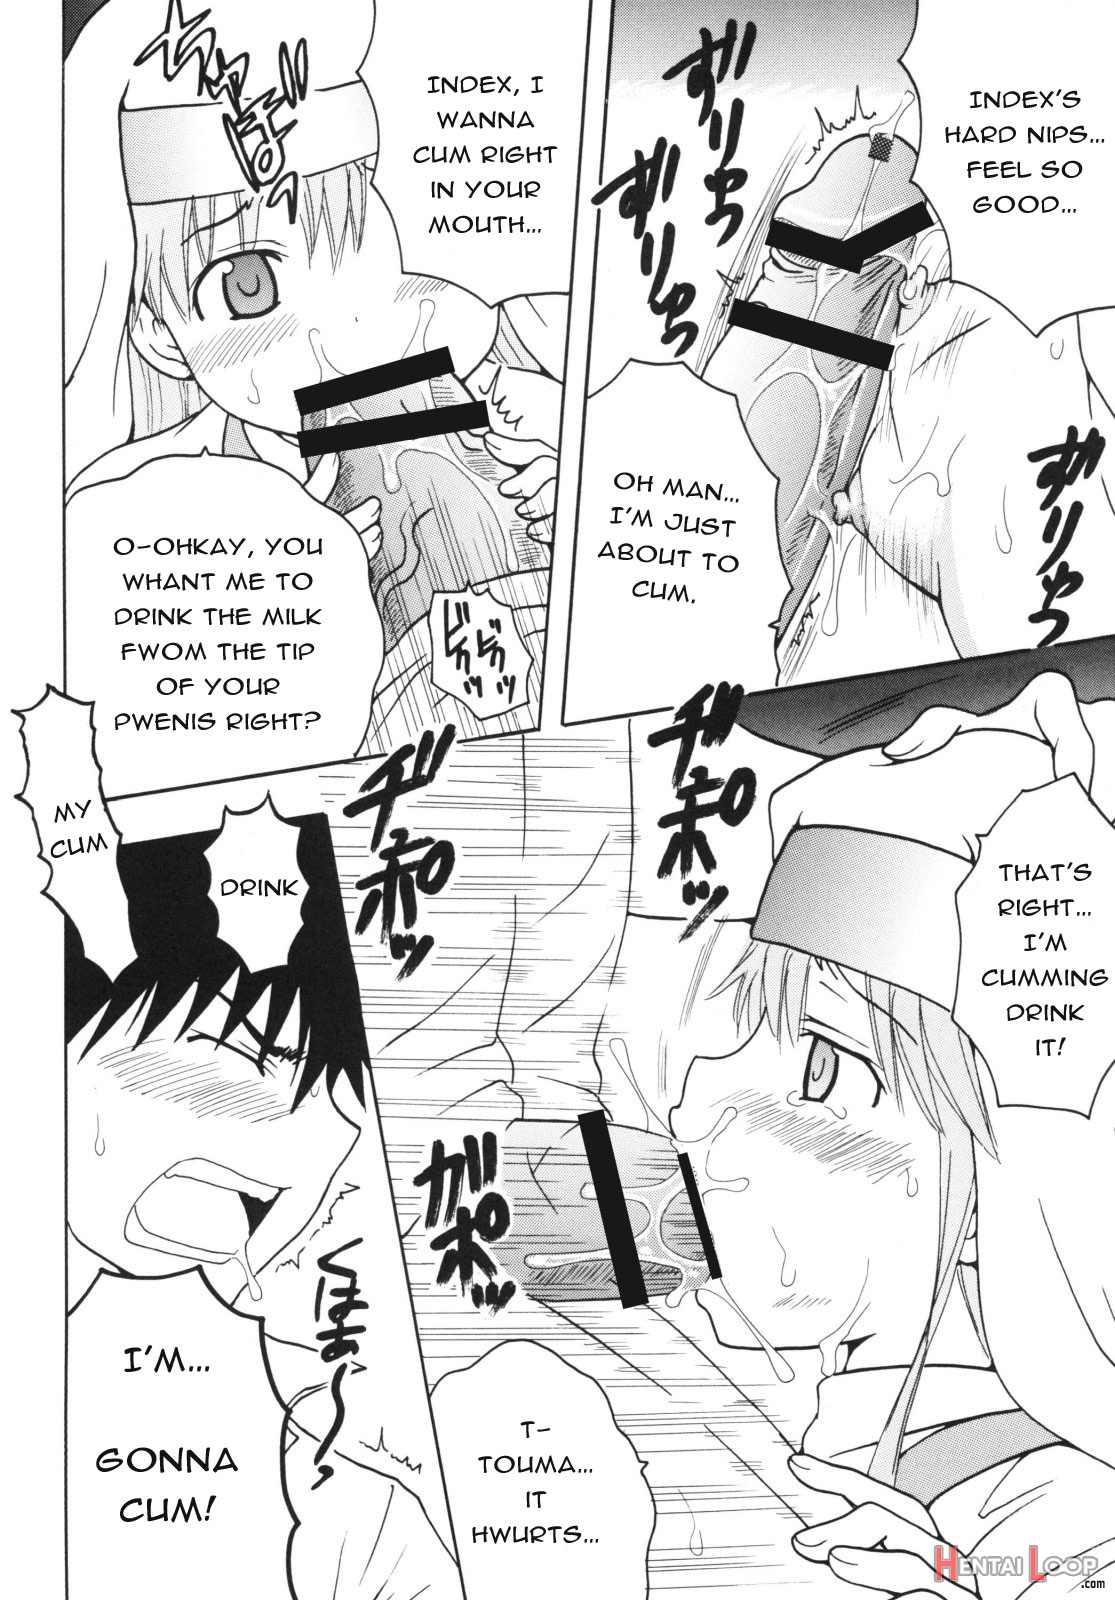 A Certain Magical Lewd Index #2 page 30